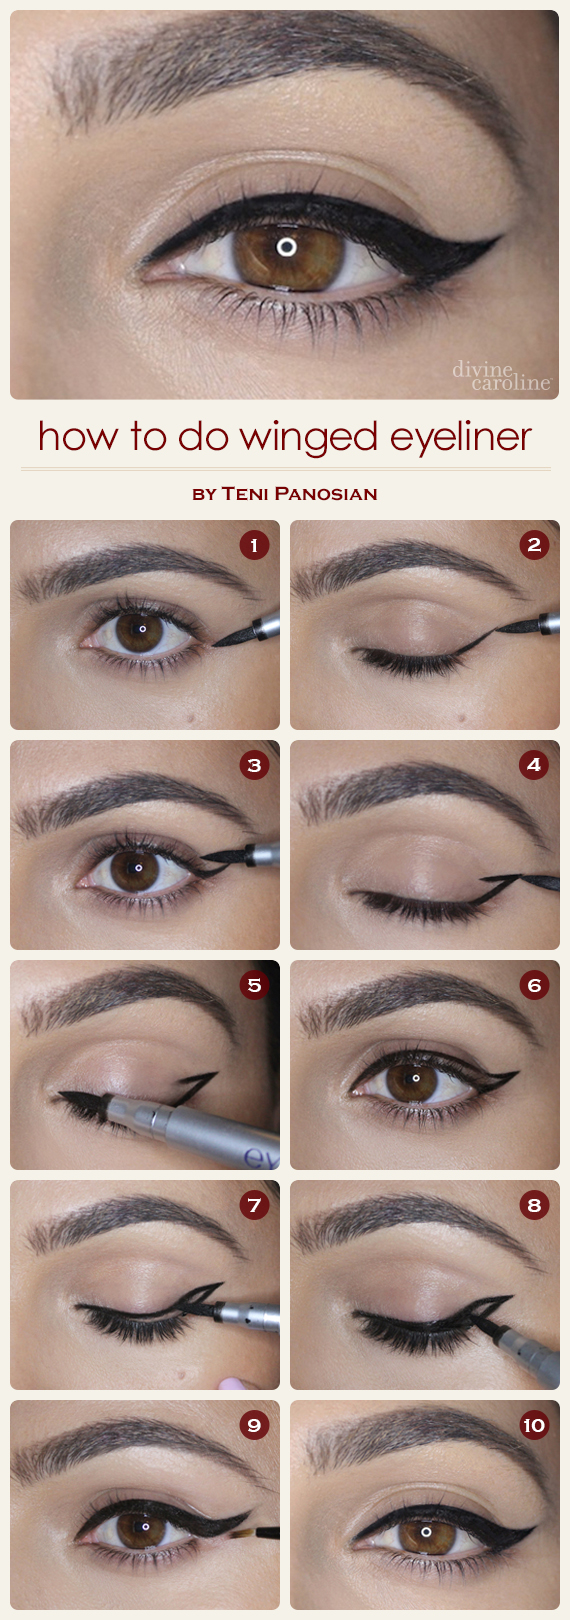 Classic Winged Eyeliner: Techniques And Tricks